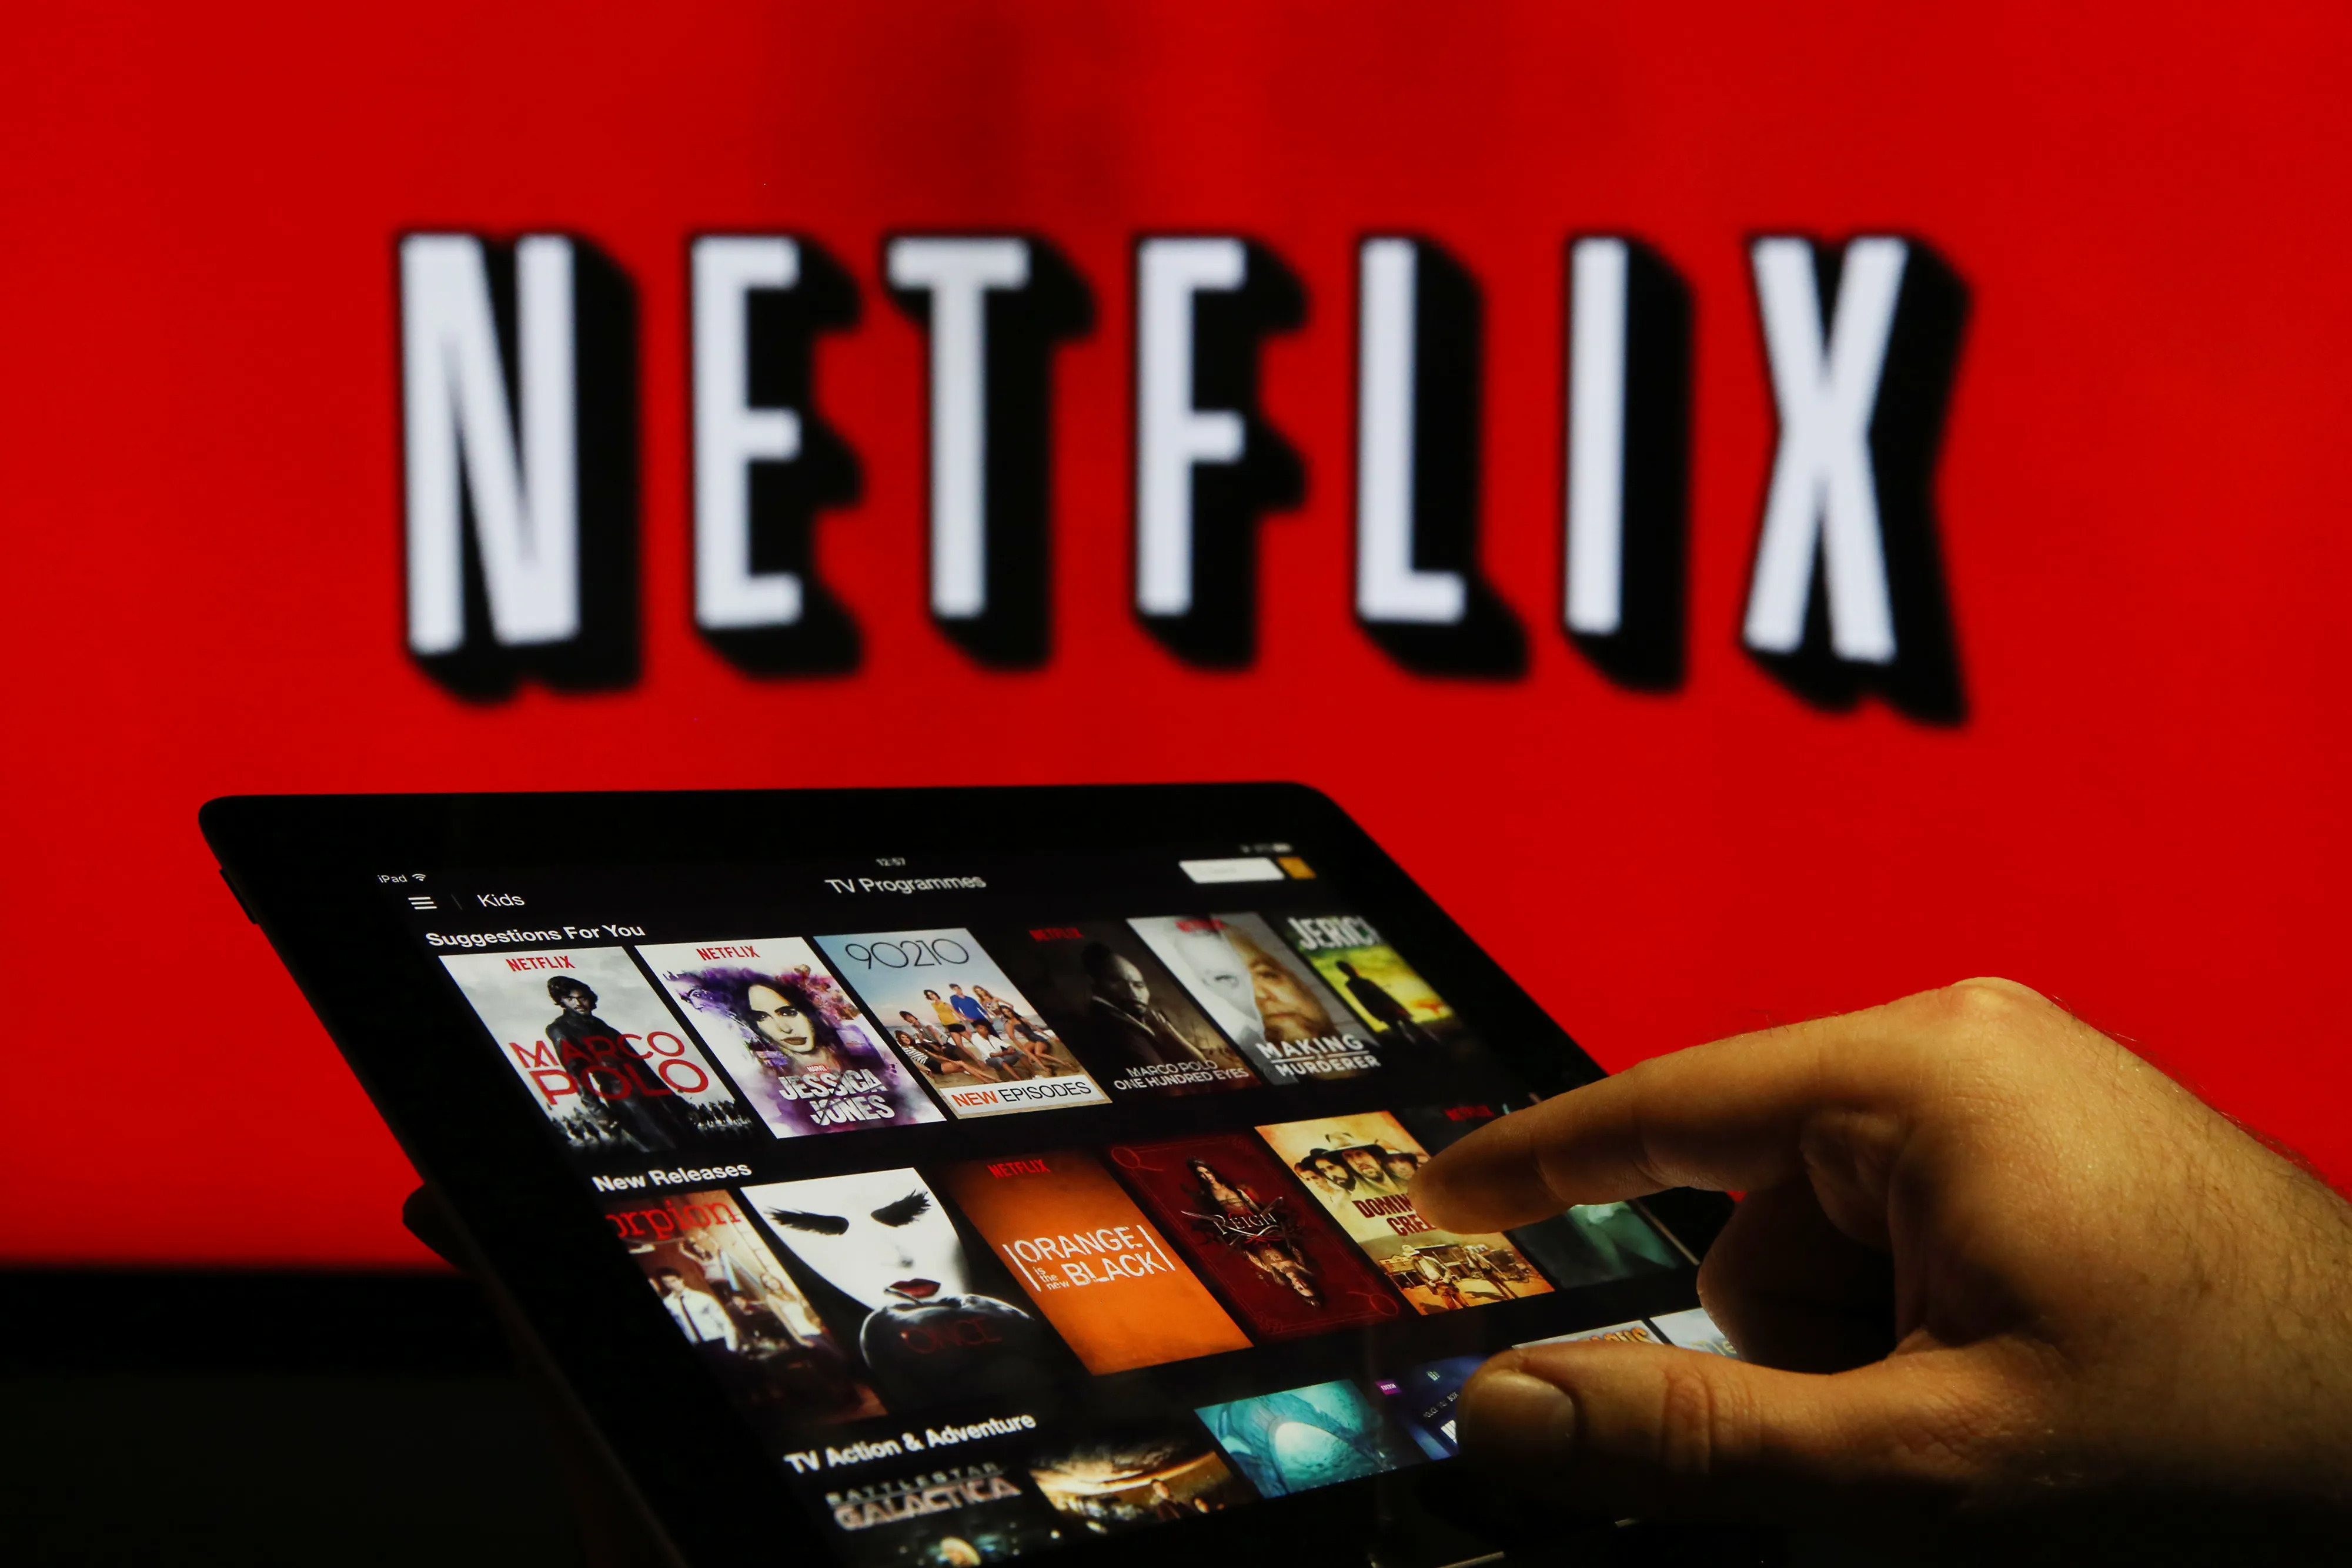 How To Download Netflix Movies On Ipad